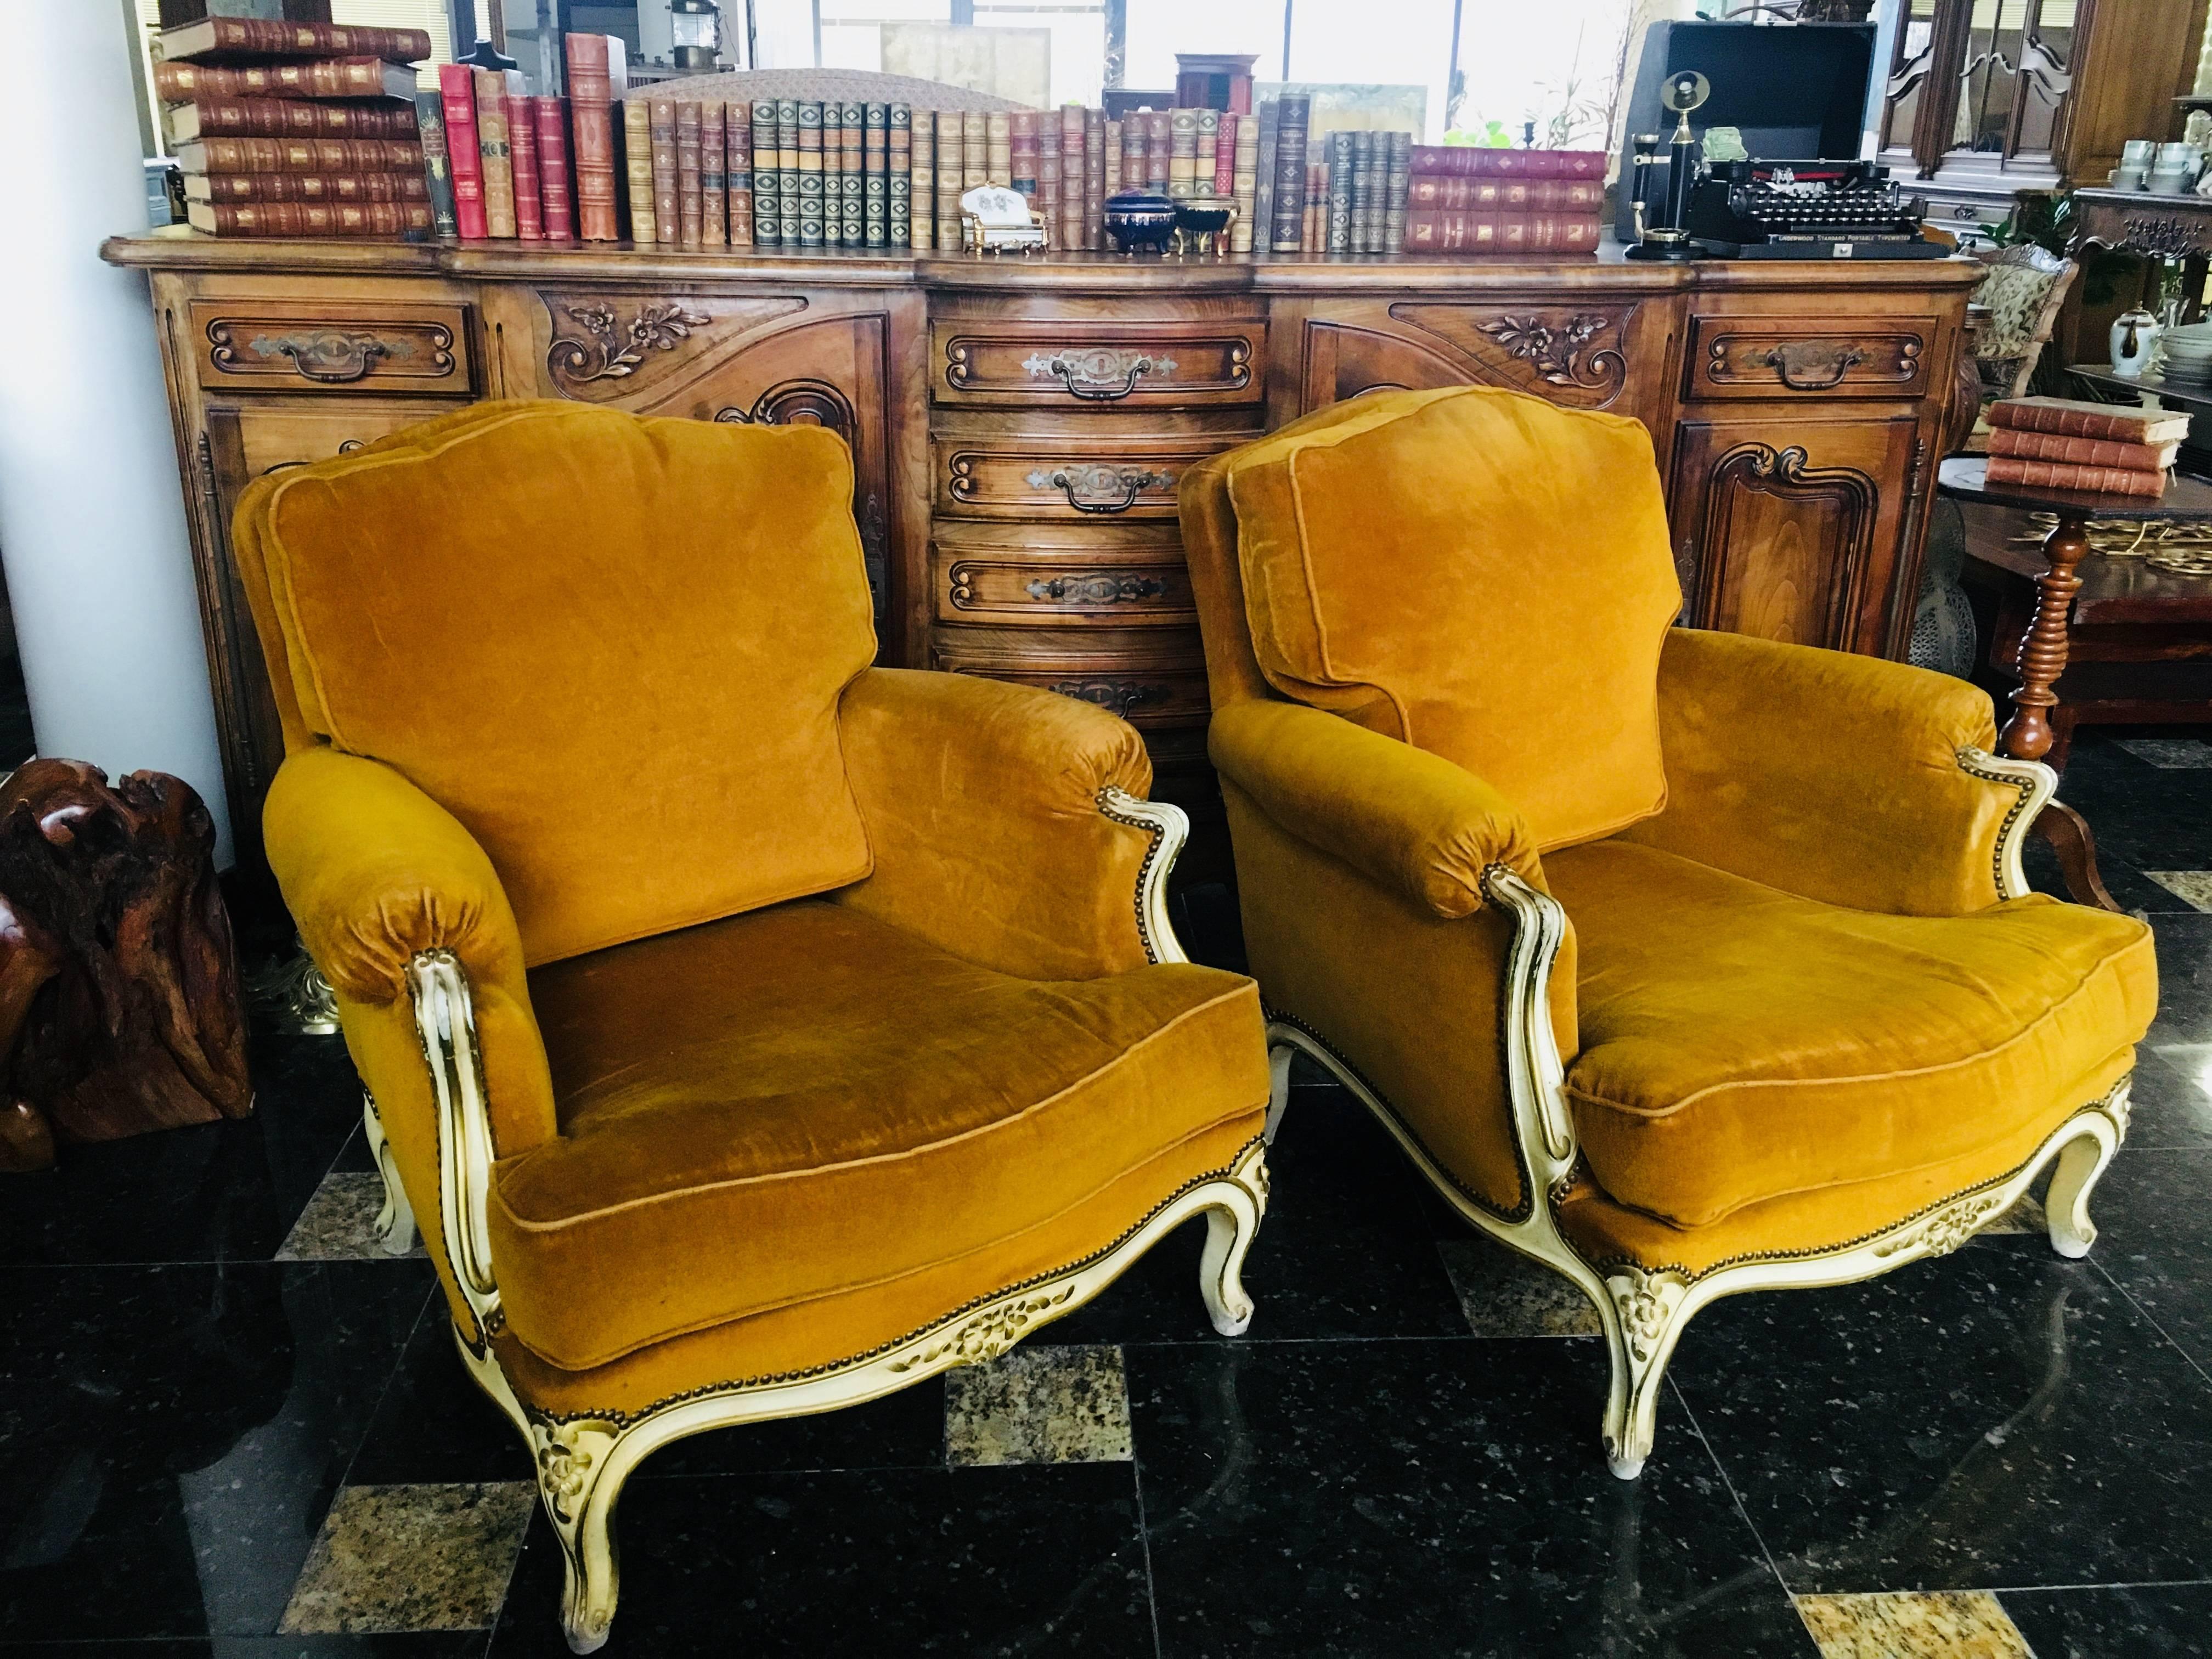 Splendid pair of 19th century French Louis XV lacquered bergeres. Having beautifully carved frame in acanthus leaf motif and mustard velvet upholstery. Perfect for today's stylish decors!
France, circa 1870